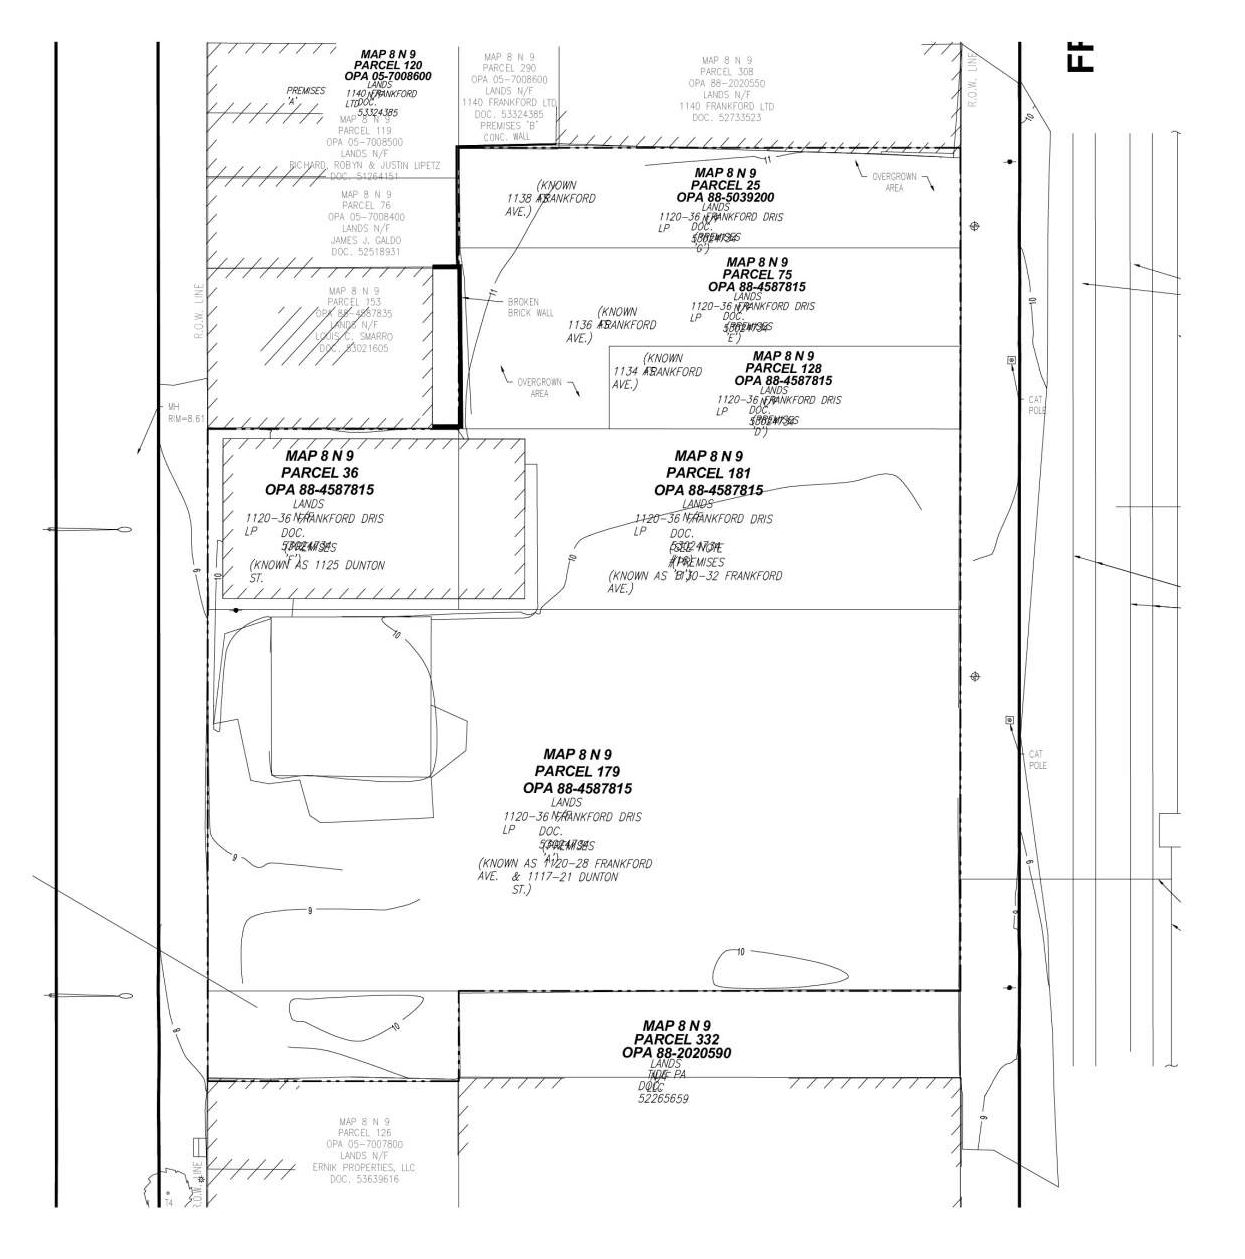 1120 Frankford Avenue. Existing site plan. Credit: BLT Architects via the Civic Design Review